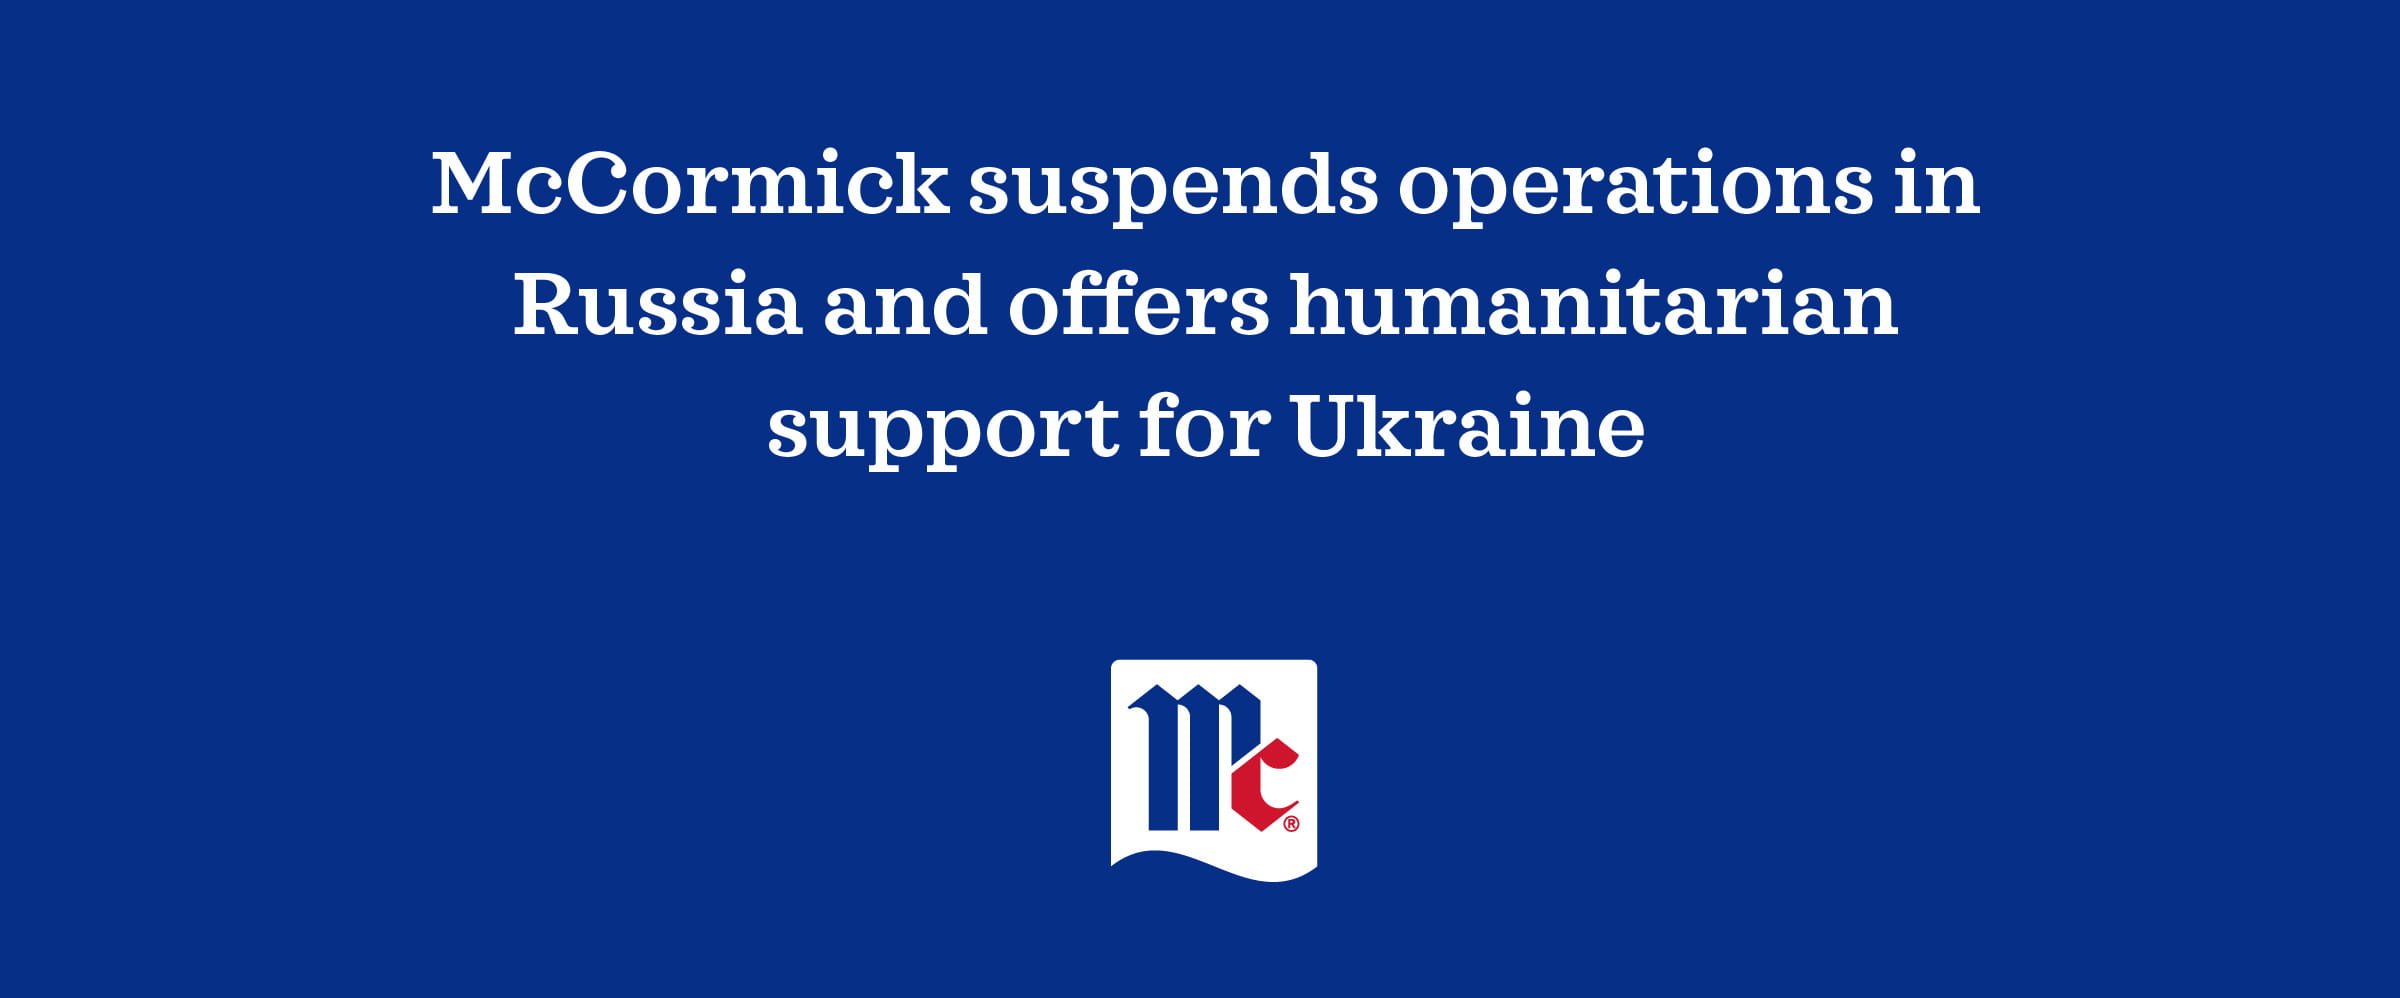 McCormick to Suspend Operations in Russia